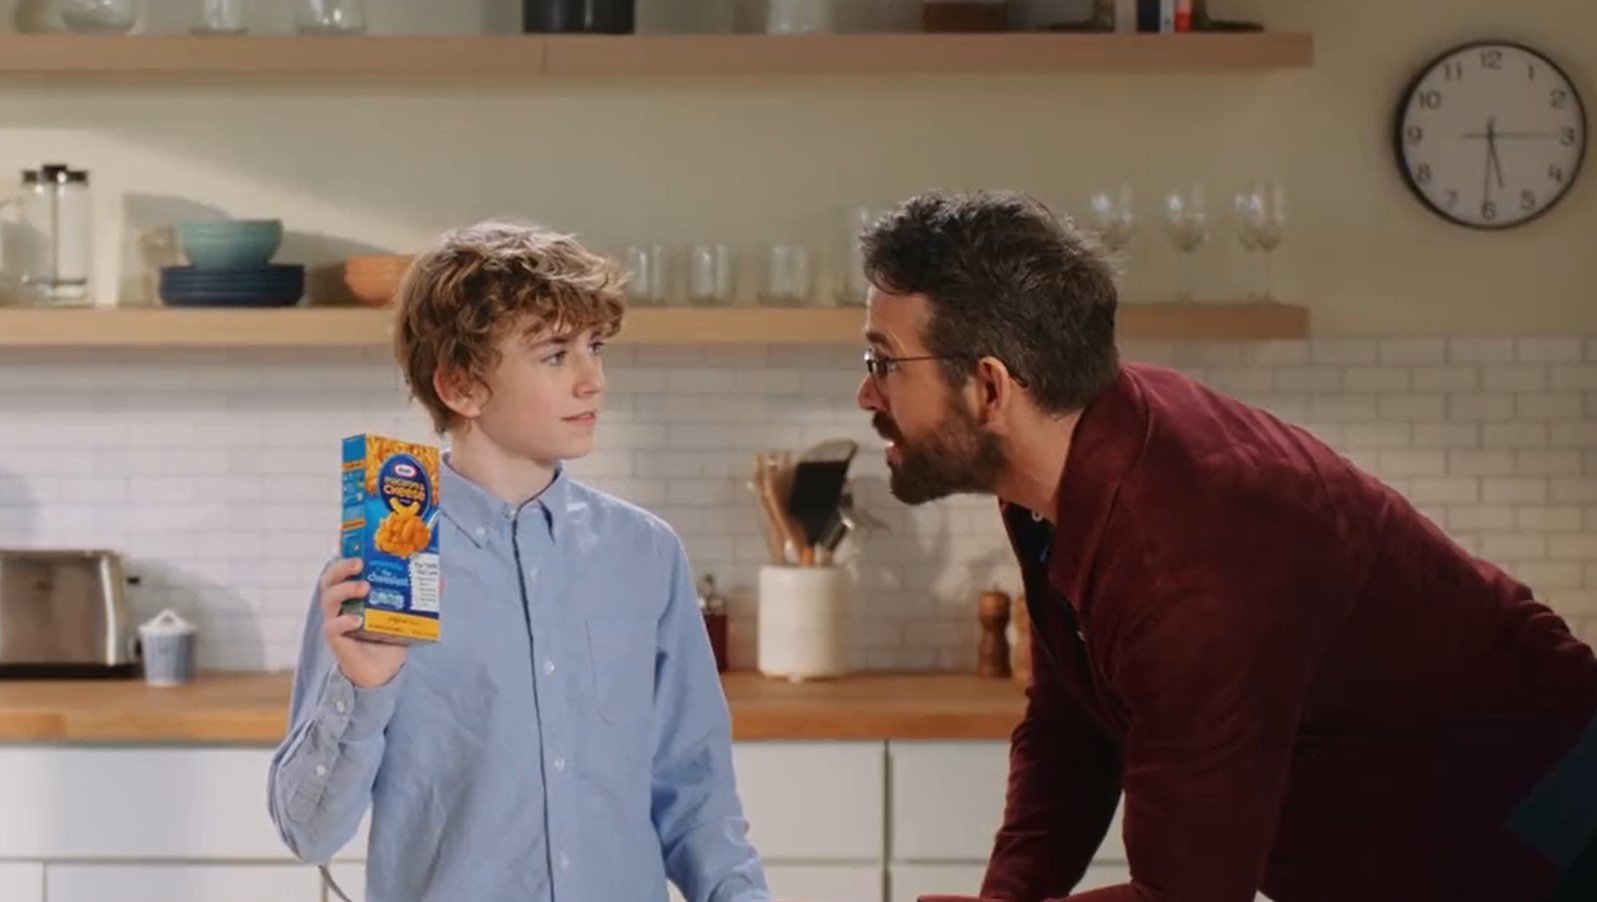 Watch: Young actor makes Wrexham gag in hilarious new Ryan Reynolds advert